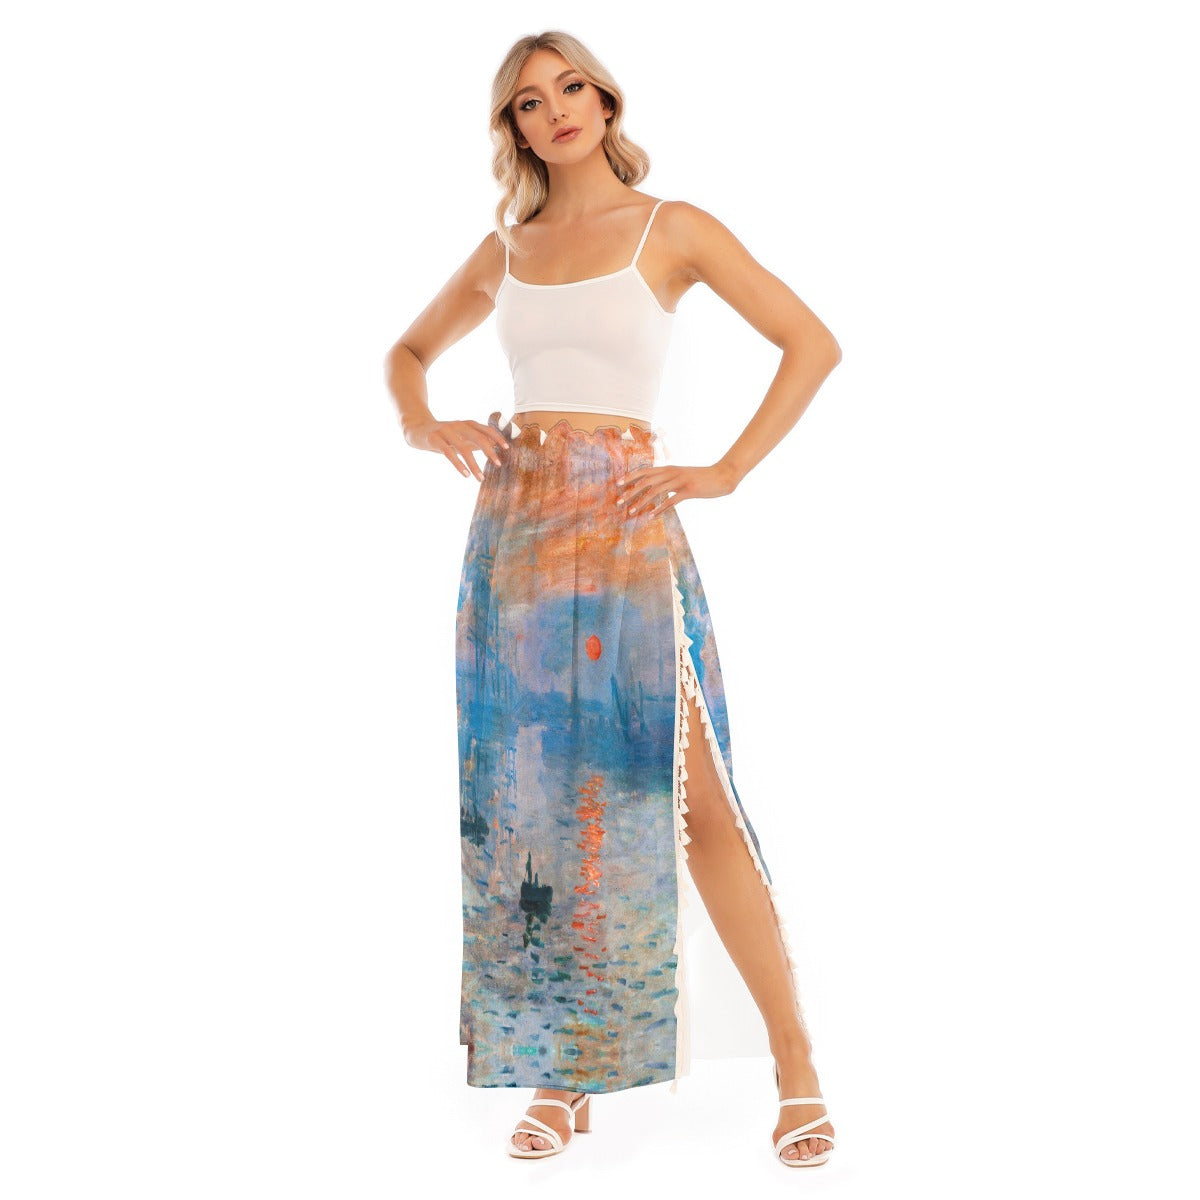 Dreamy skirt with artistic flair